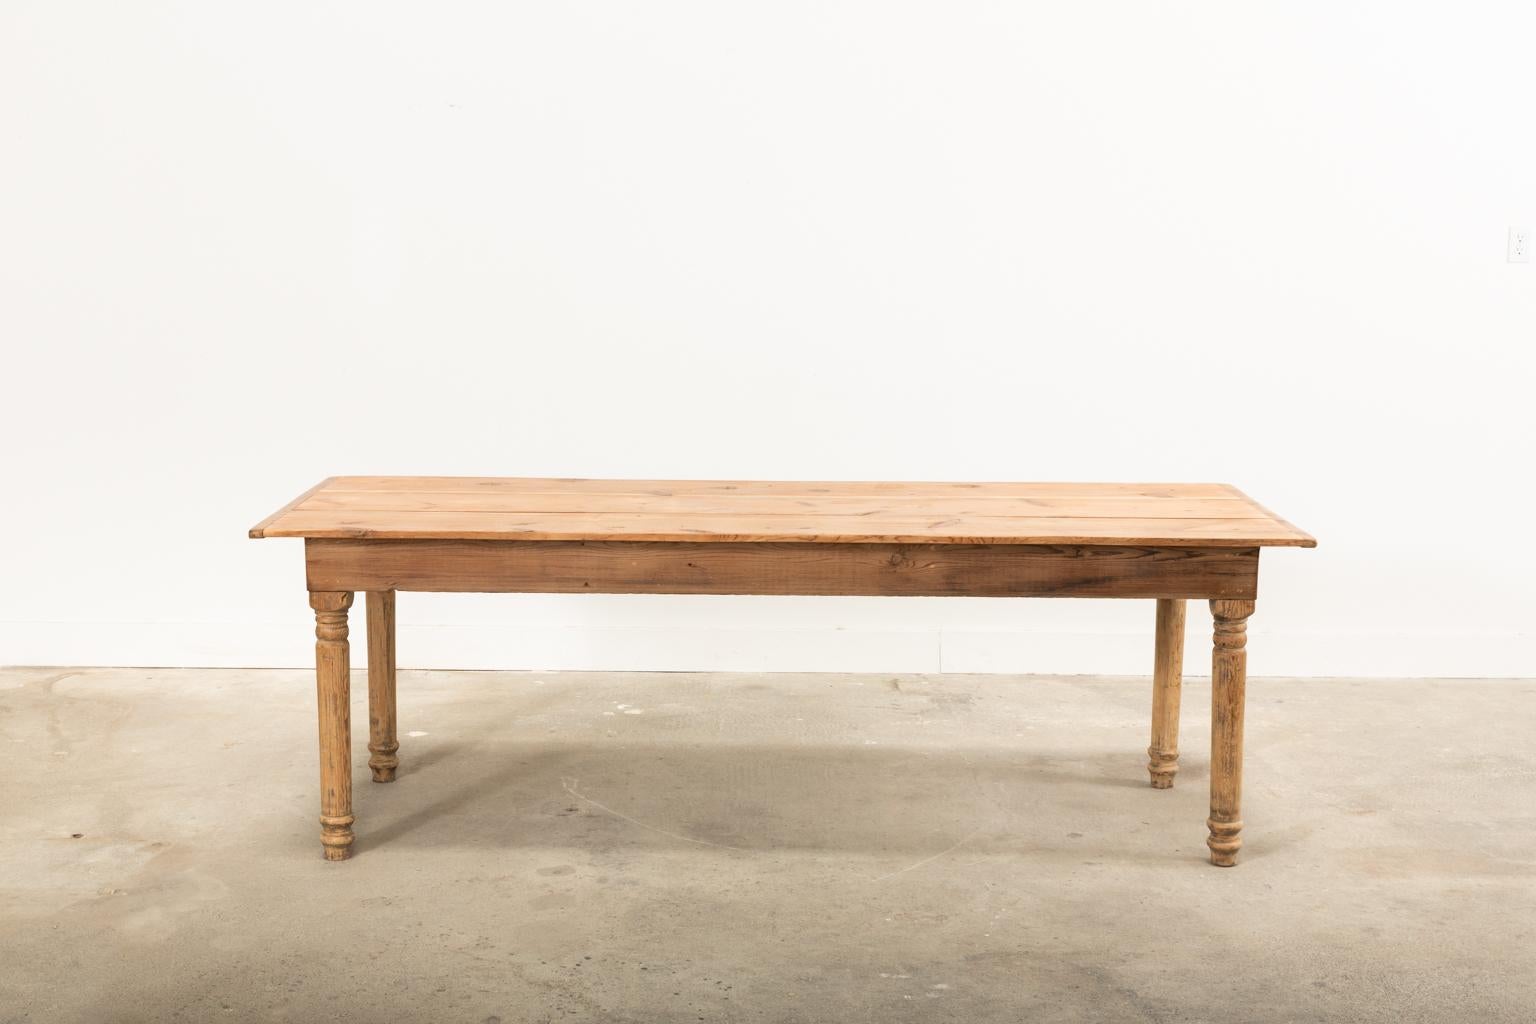 20th Century American Country Reclaimed Pine Farmhouse Dining Table